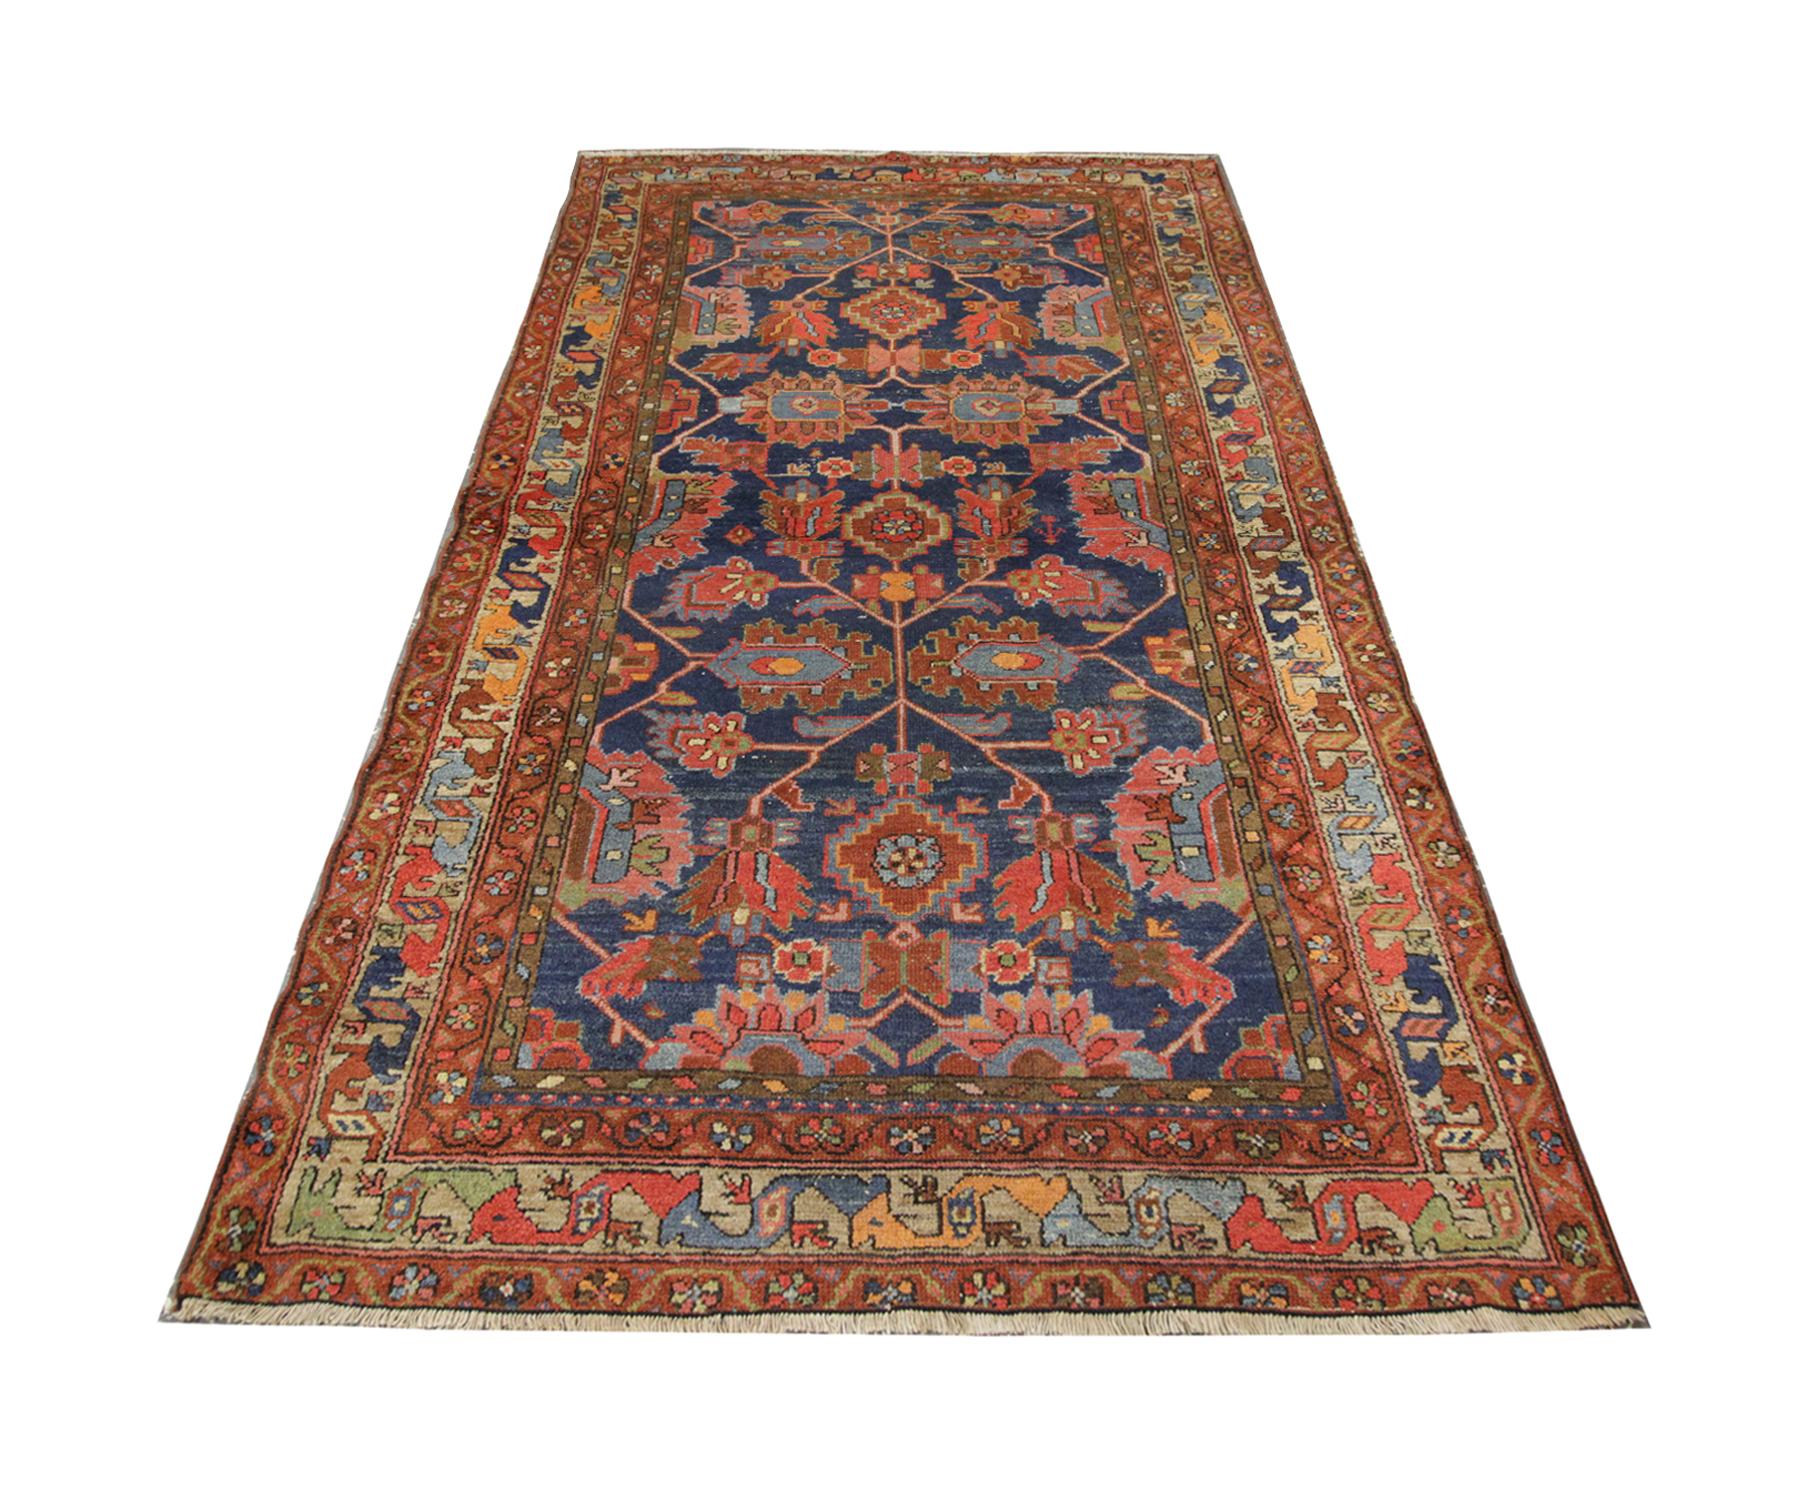 This antique area rug was handwoven by artisans with handspun wool which has been dyed using organic vegetable dyes. The multi-layered border features symbolic details believed to have been an emulation of dragons. In Chinese mythology, they are